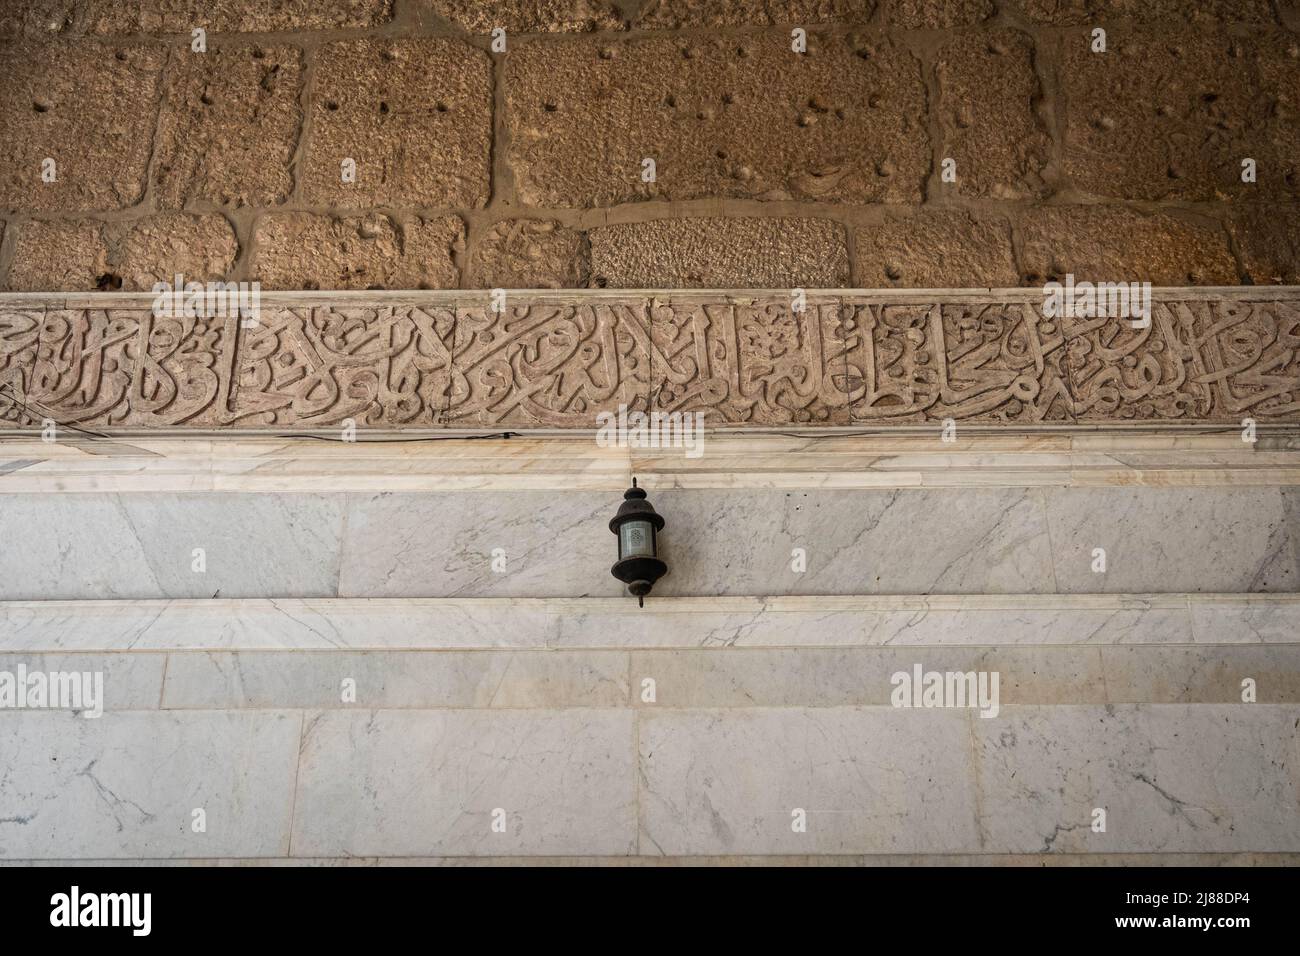 Damascus, Syria -May, 2022: Calligrphy inside the Umayyad Mosque, also known as the Great Mosque of Damascus Stock Photo